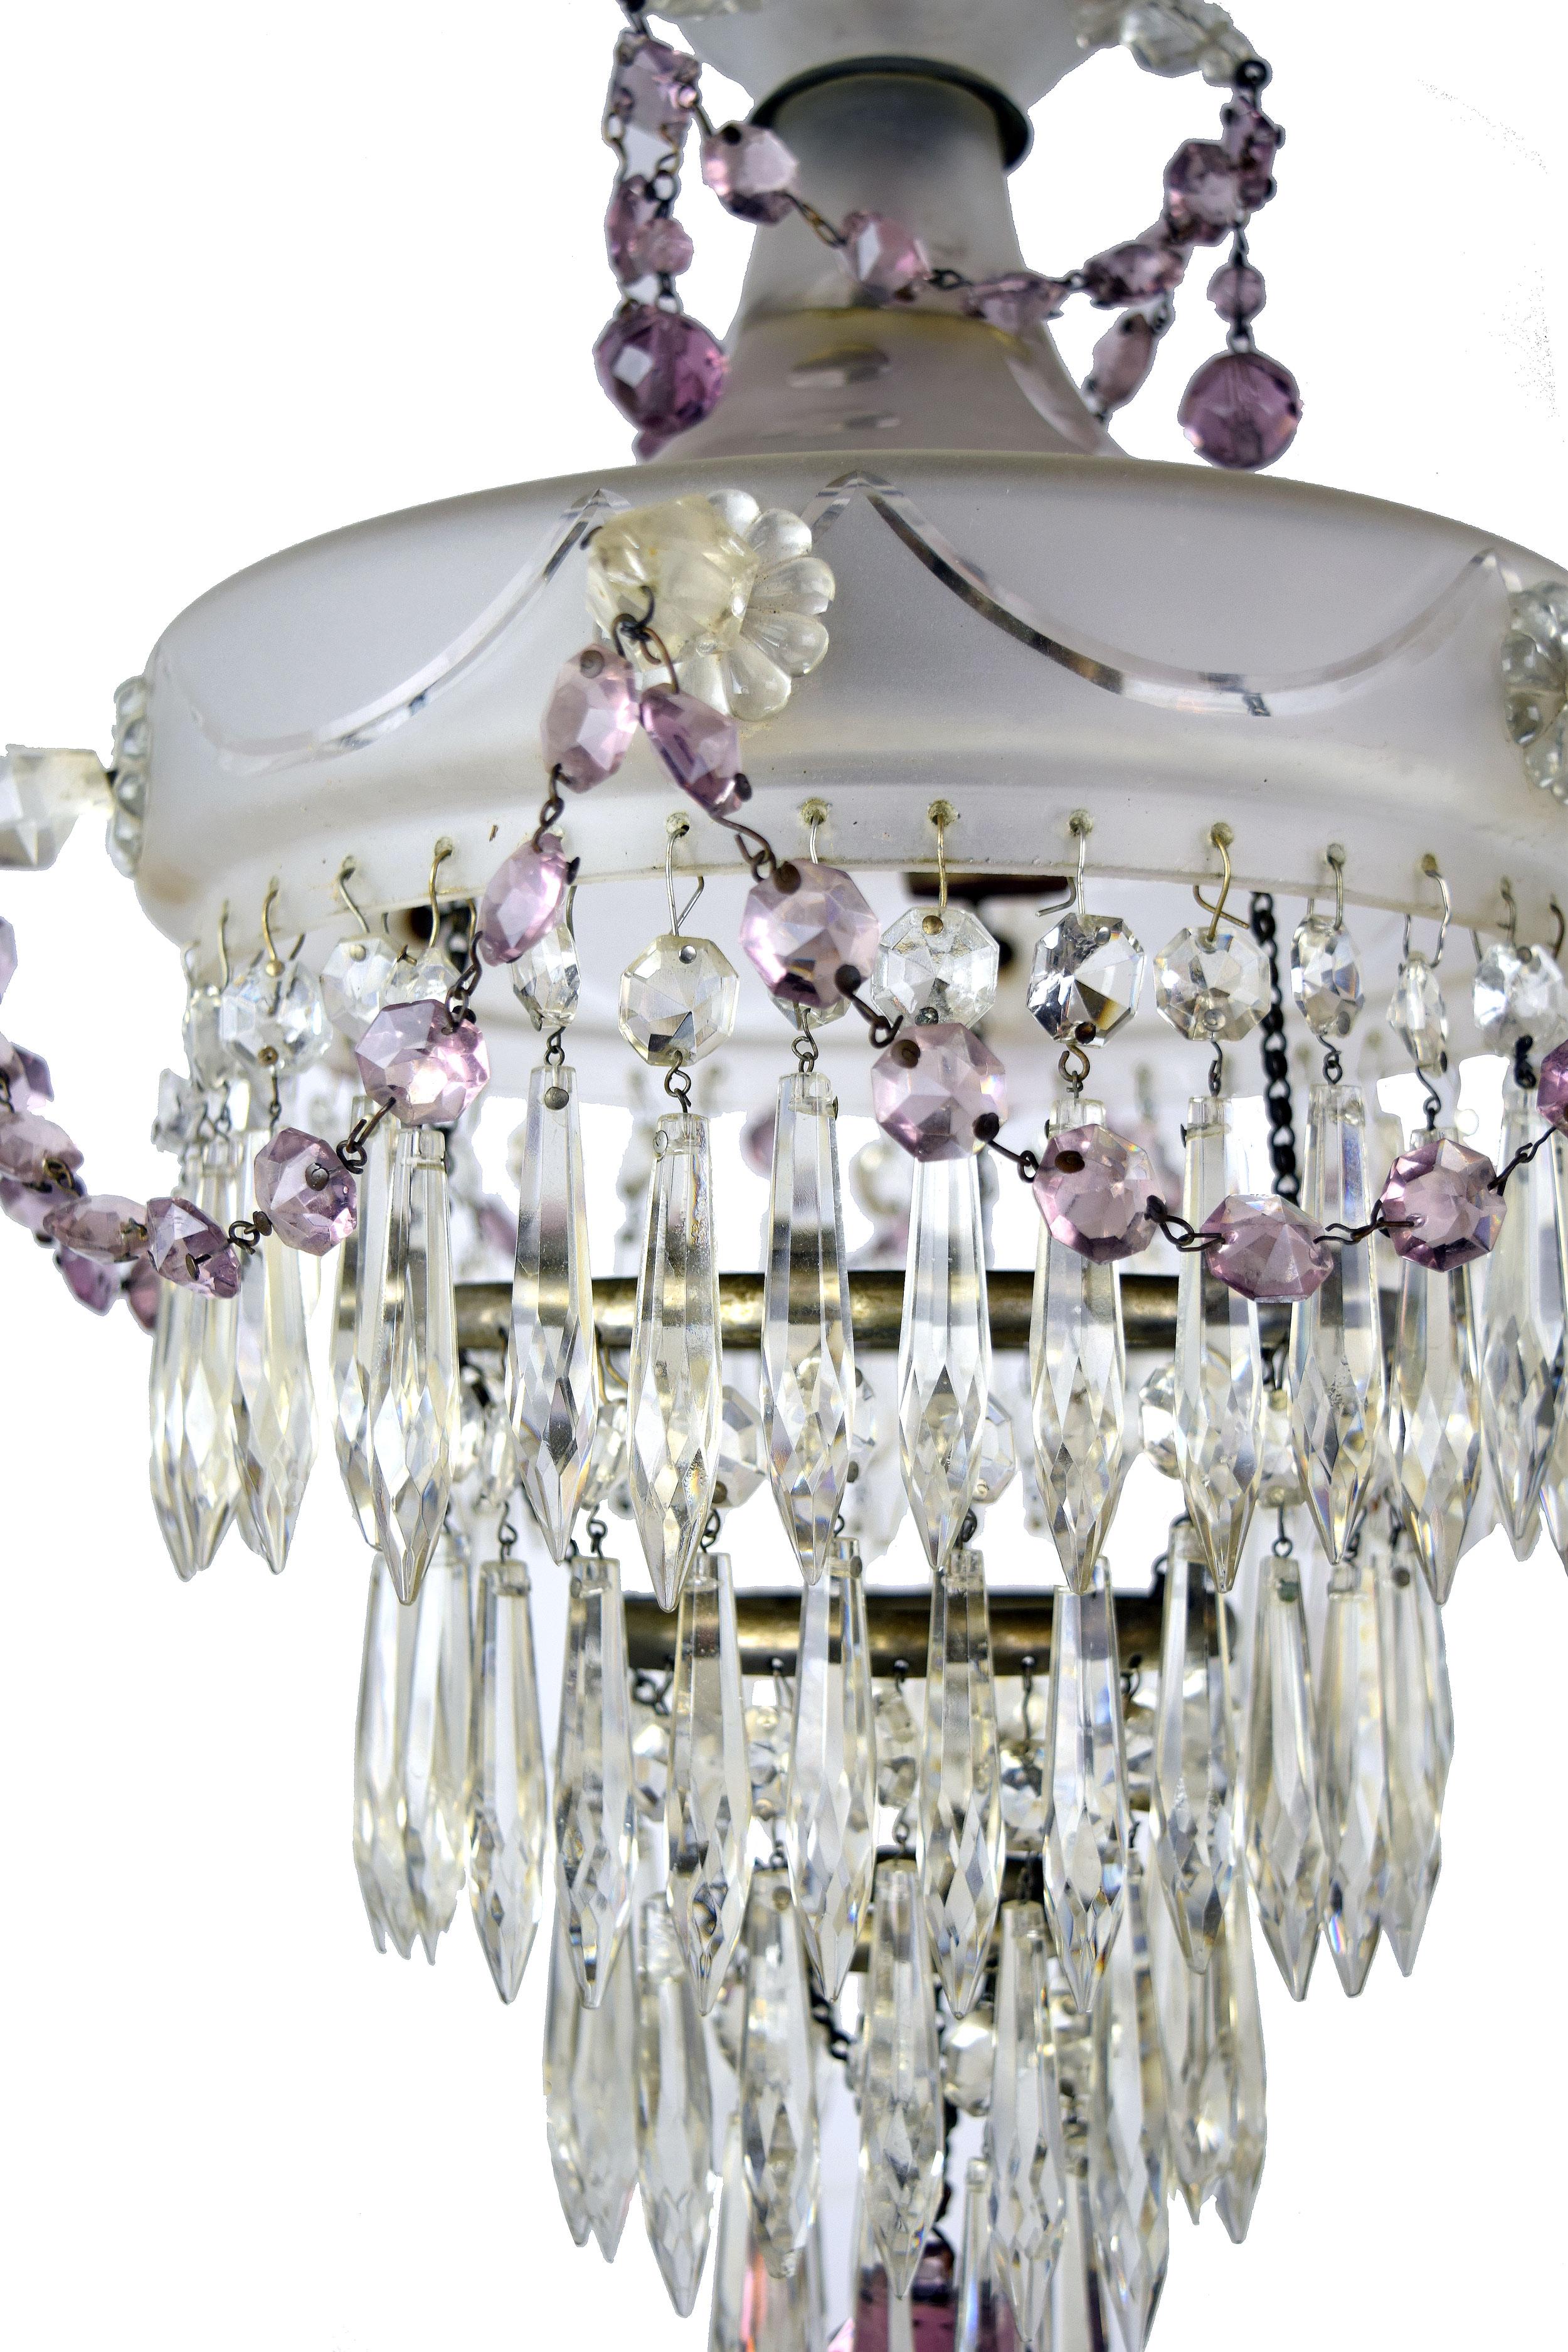 This elegant and simply gorgeous glass body chandelier features 4 tiers of dazzling crystals with eye-catching purple crystals intertwined. Roping of these lovely beaded crystals hang from the unique prism shaped glass that accents the bowl. The